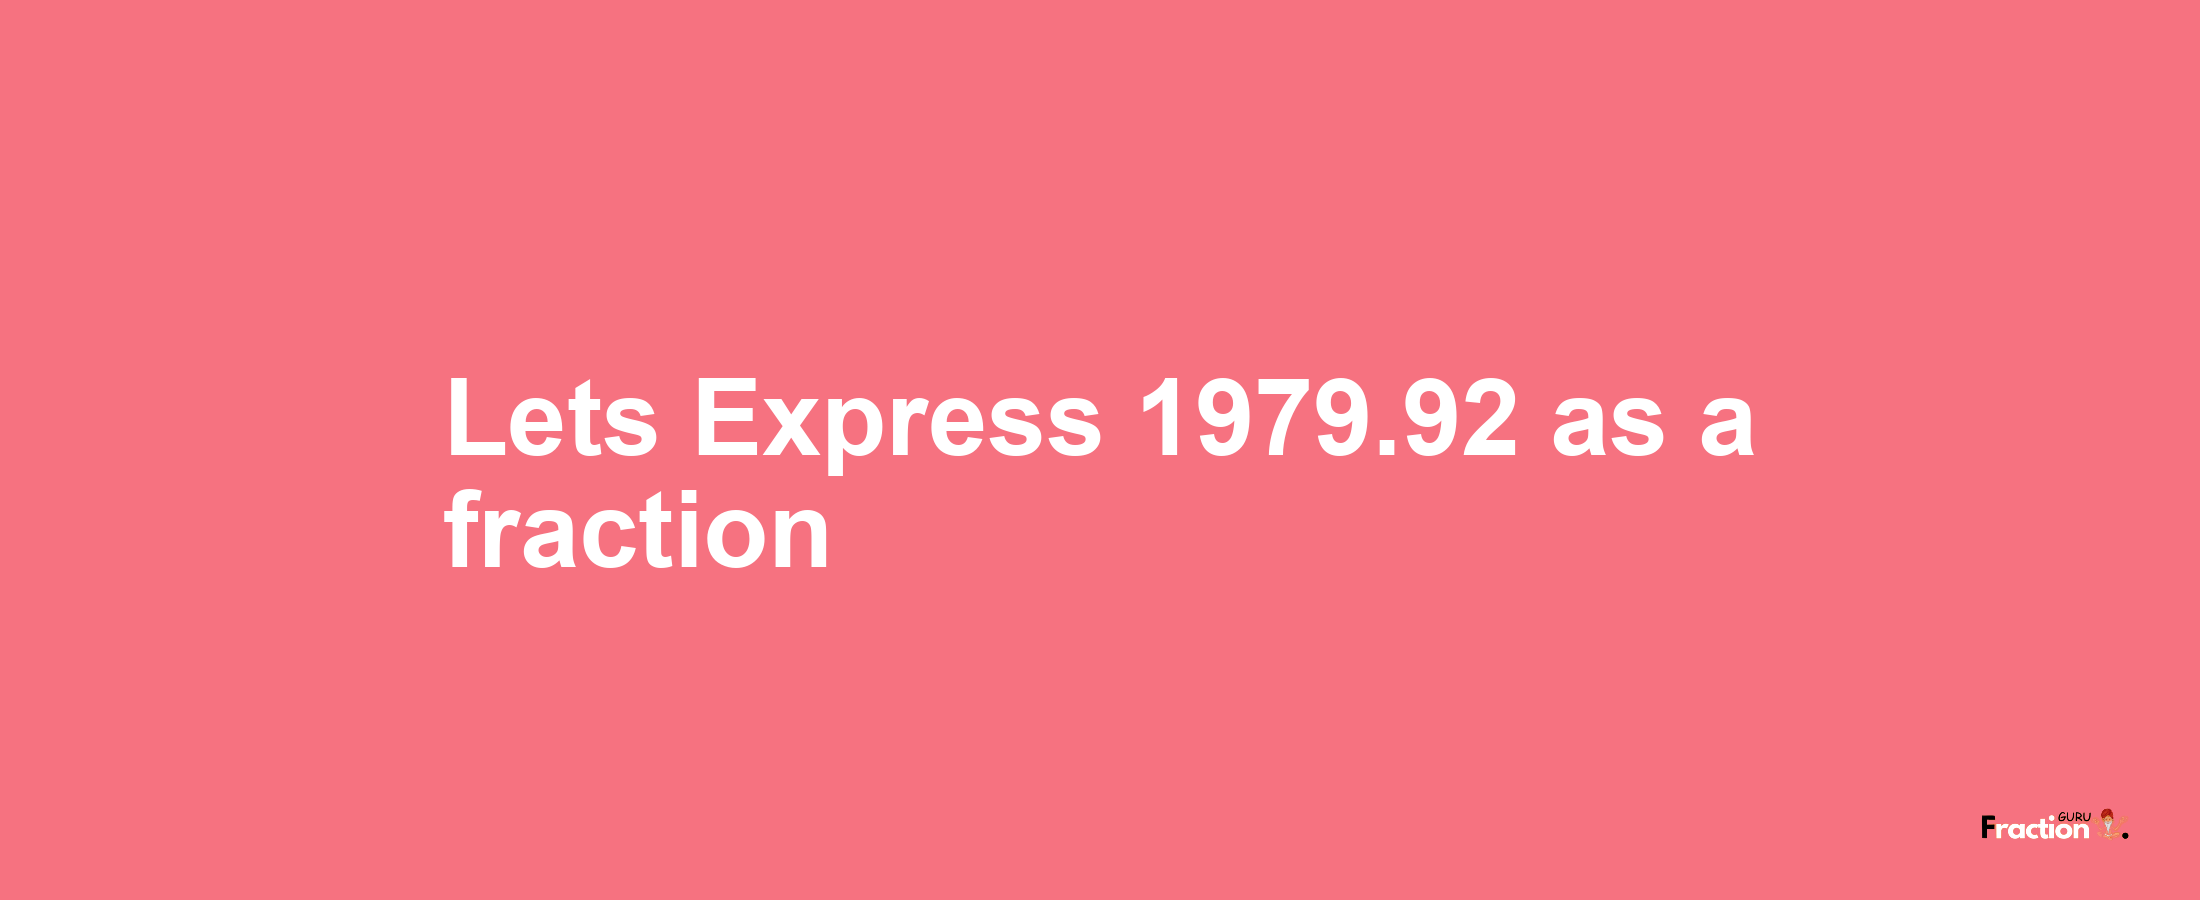 Lets Express 1979.92 as afraction